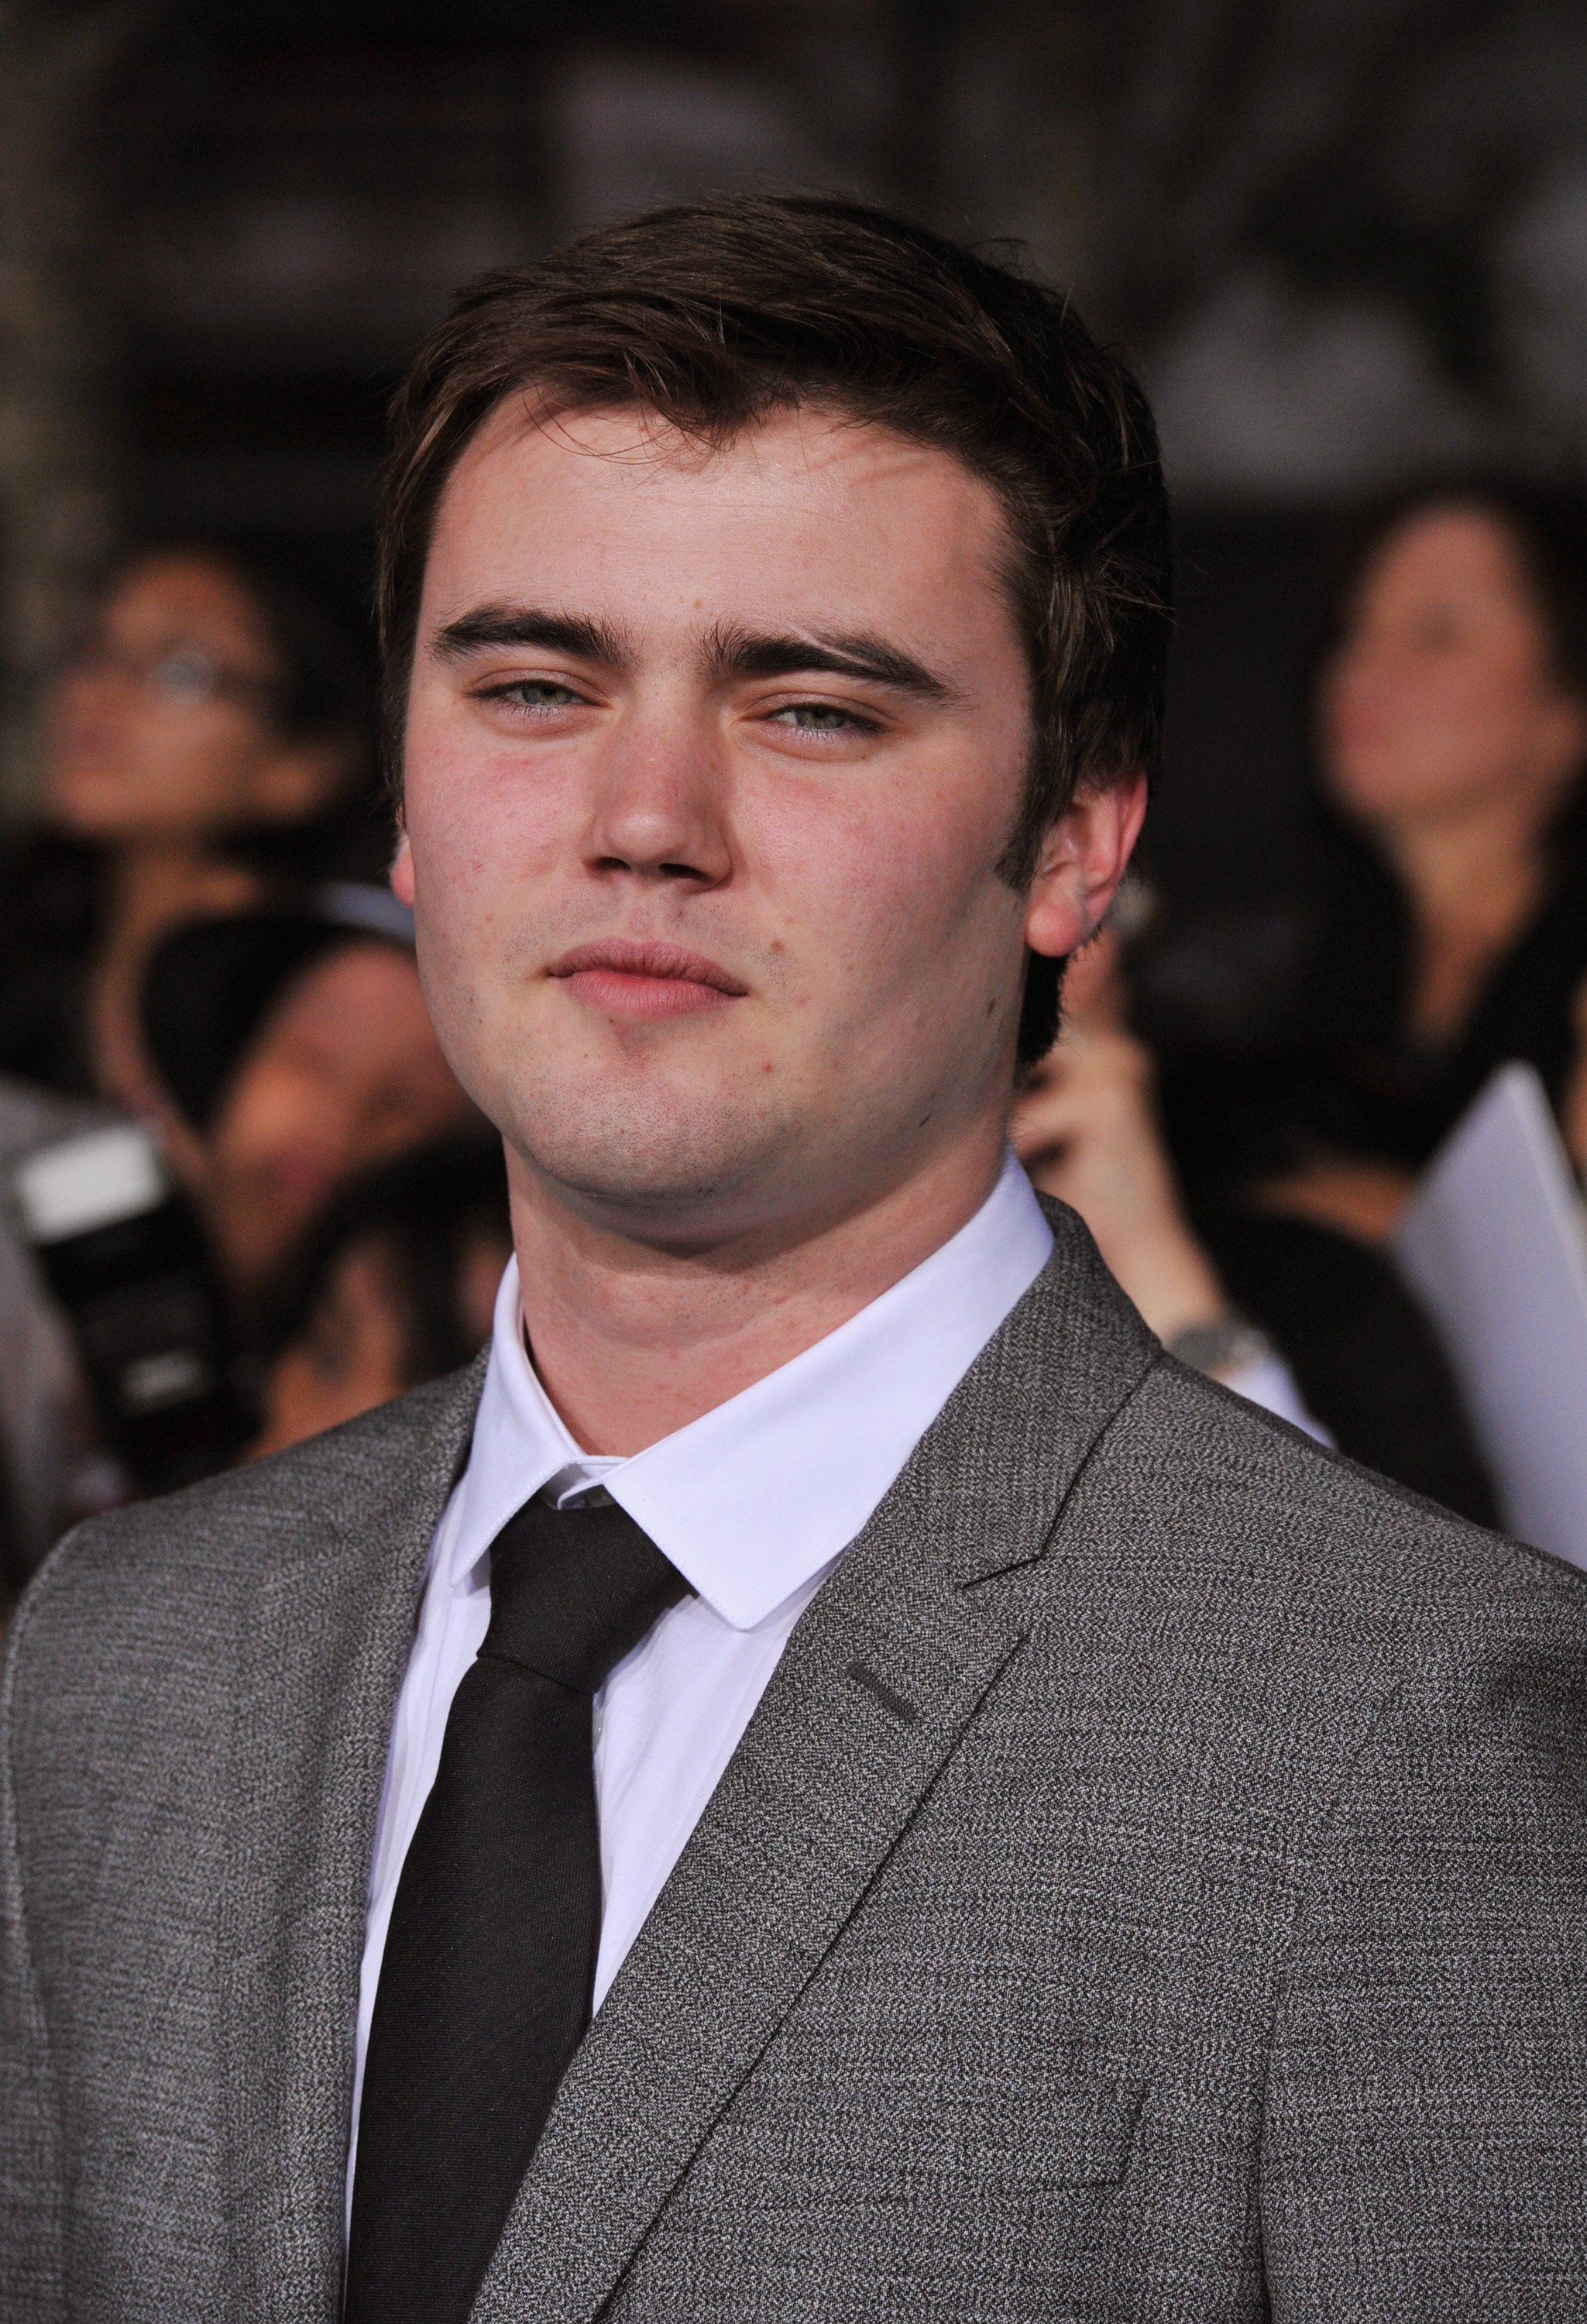 Cameron Bright arrives at "The Twilight Saga: Breaking Dawn - Part 2" premiere at the Nokia Theatre L.A. Live in Los Angeles, California on November 12, 2012 | Source: Getty Images